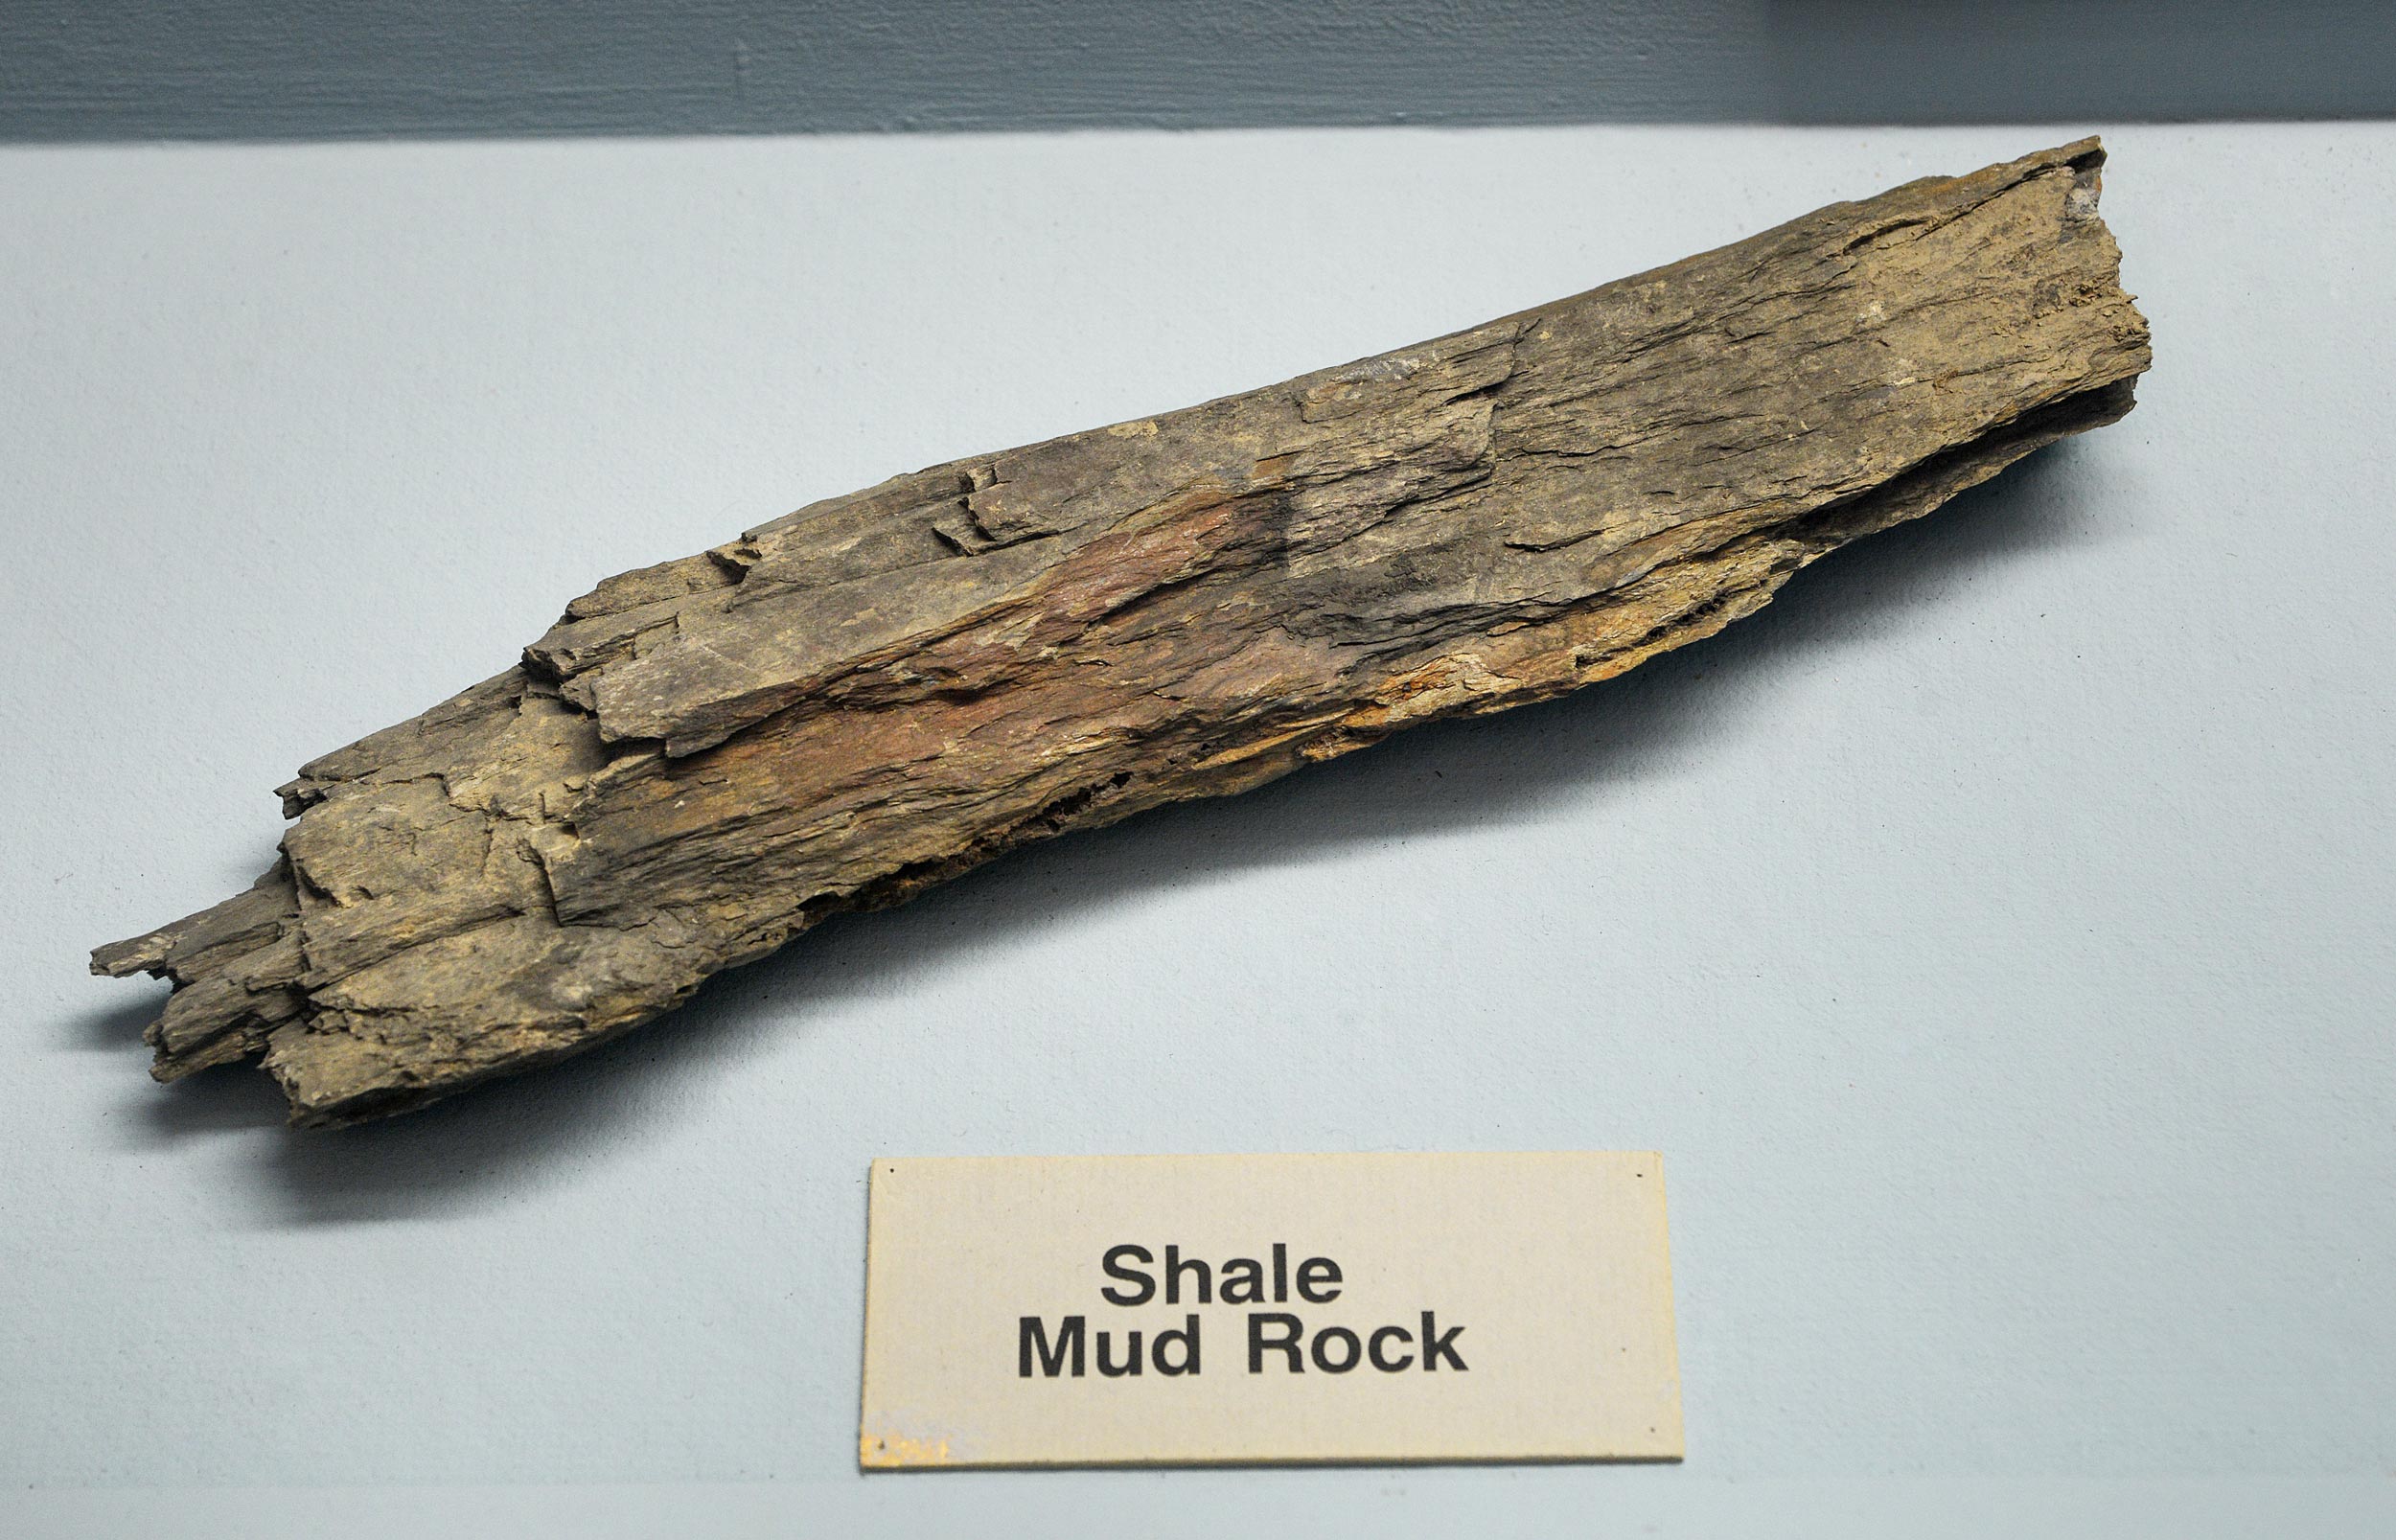 Long piece of shale mud rock with a flaky, layered appearance and a label reading "Shale Mud Rock."